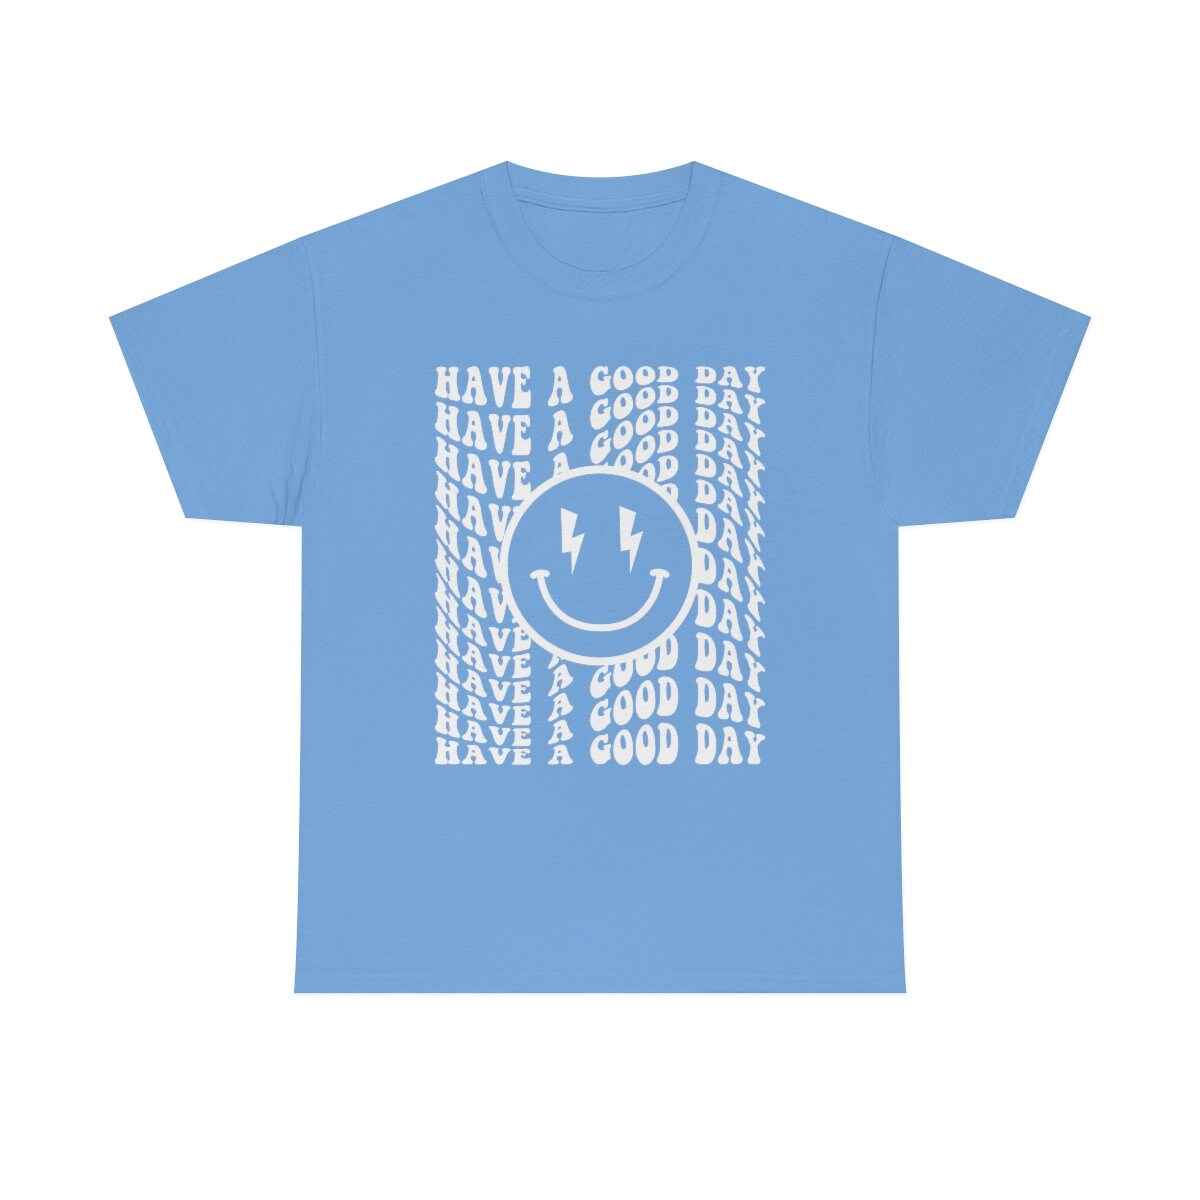 Have a Good Day Shirt, Lightning Bolt Smile Face, Trendy Aesthetic Tee, Preppy  Clothes, Y2k Oversized, Beachy Summer Shirt, Positive Gift -  Canada